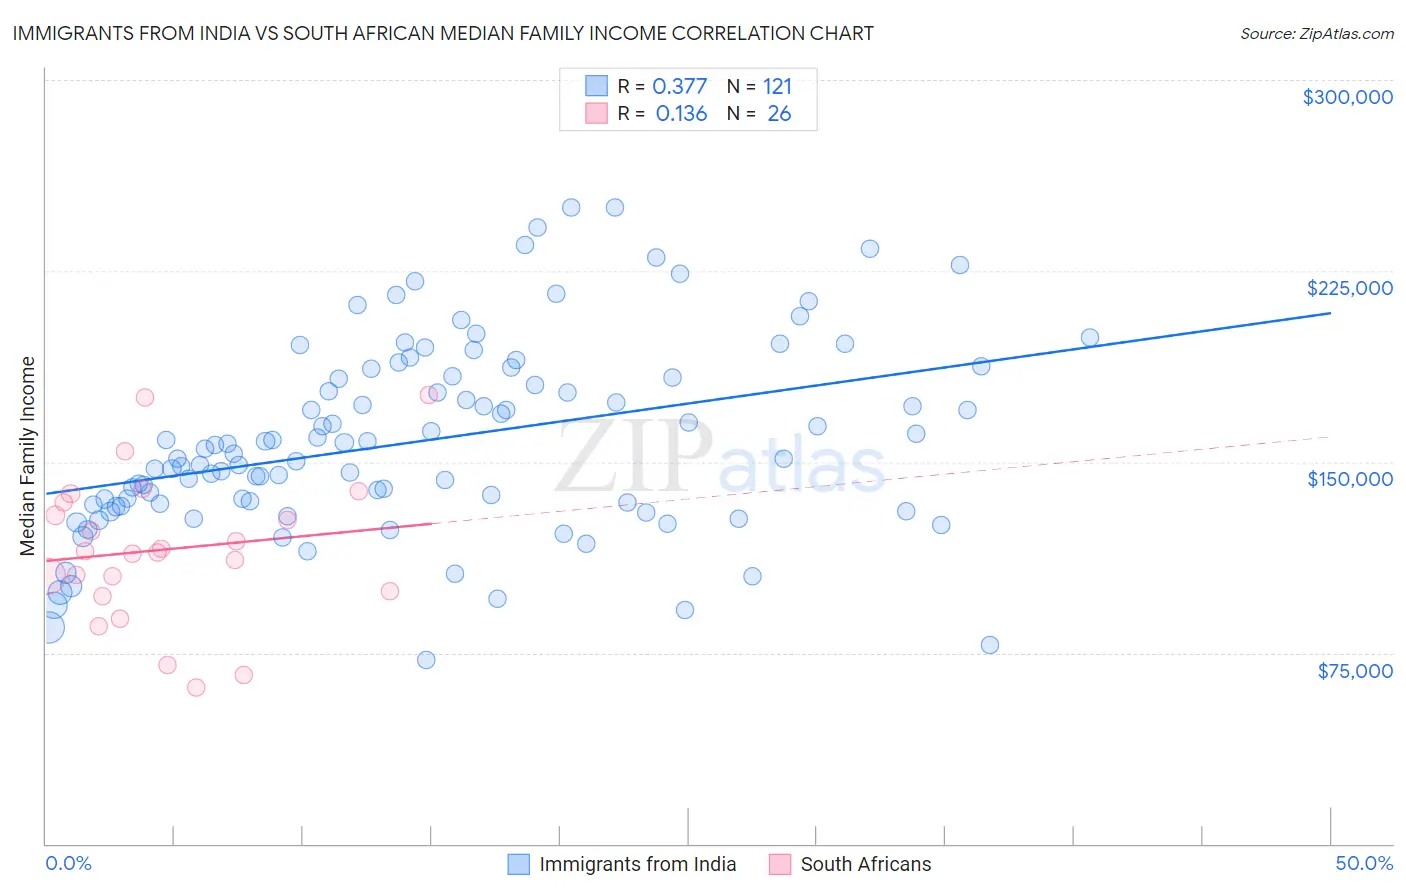 Immigrants from India vs South African Median Family Income